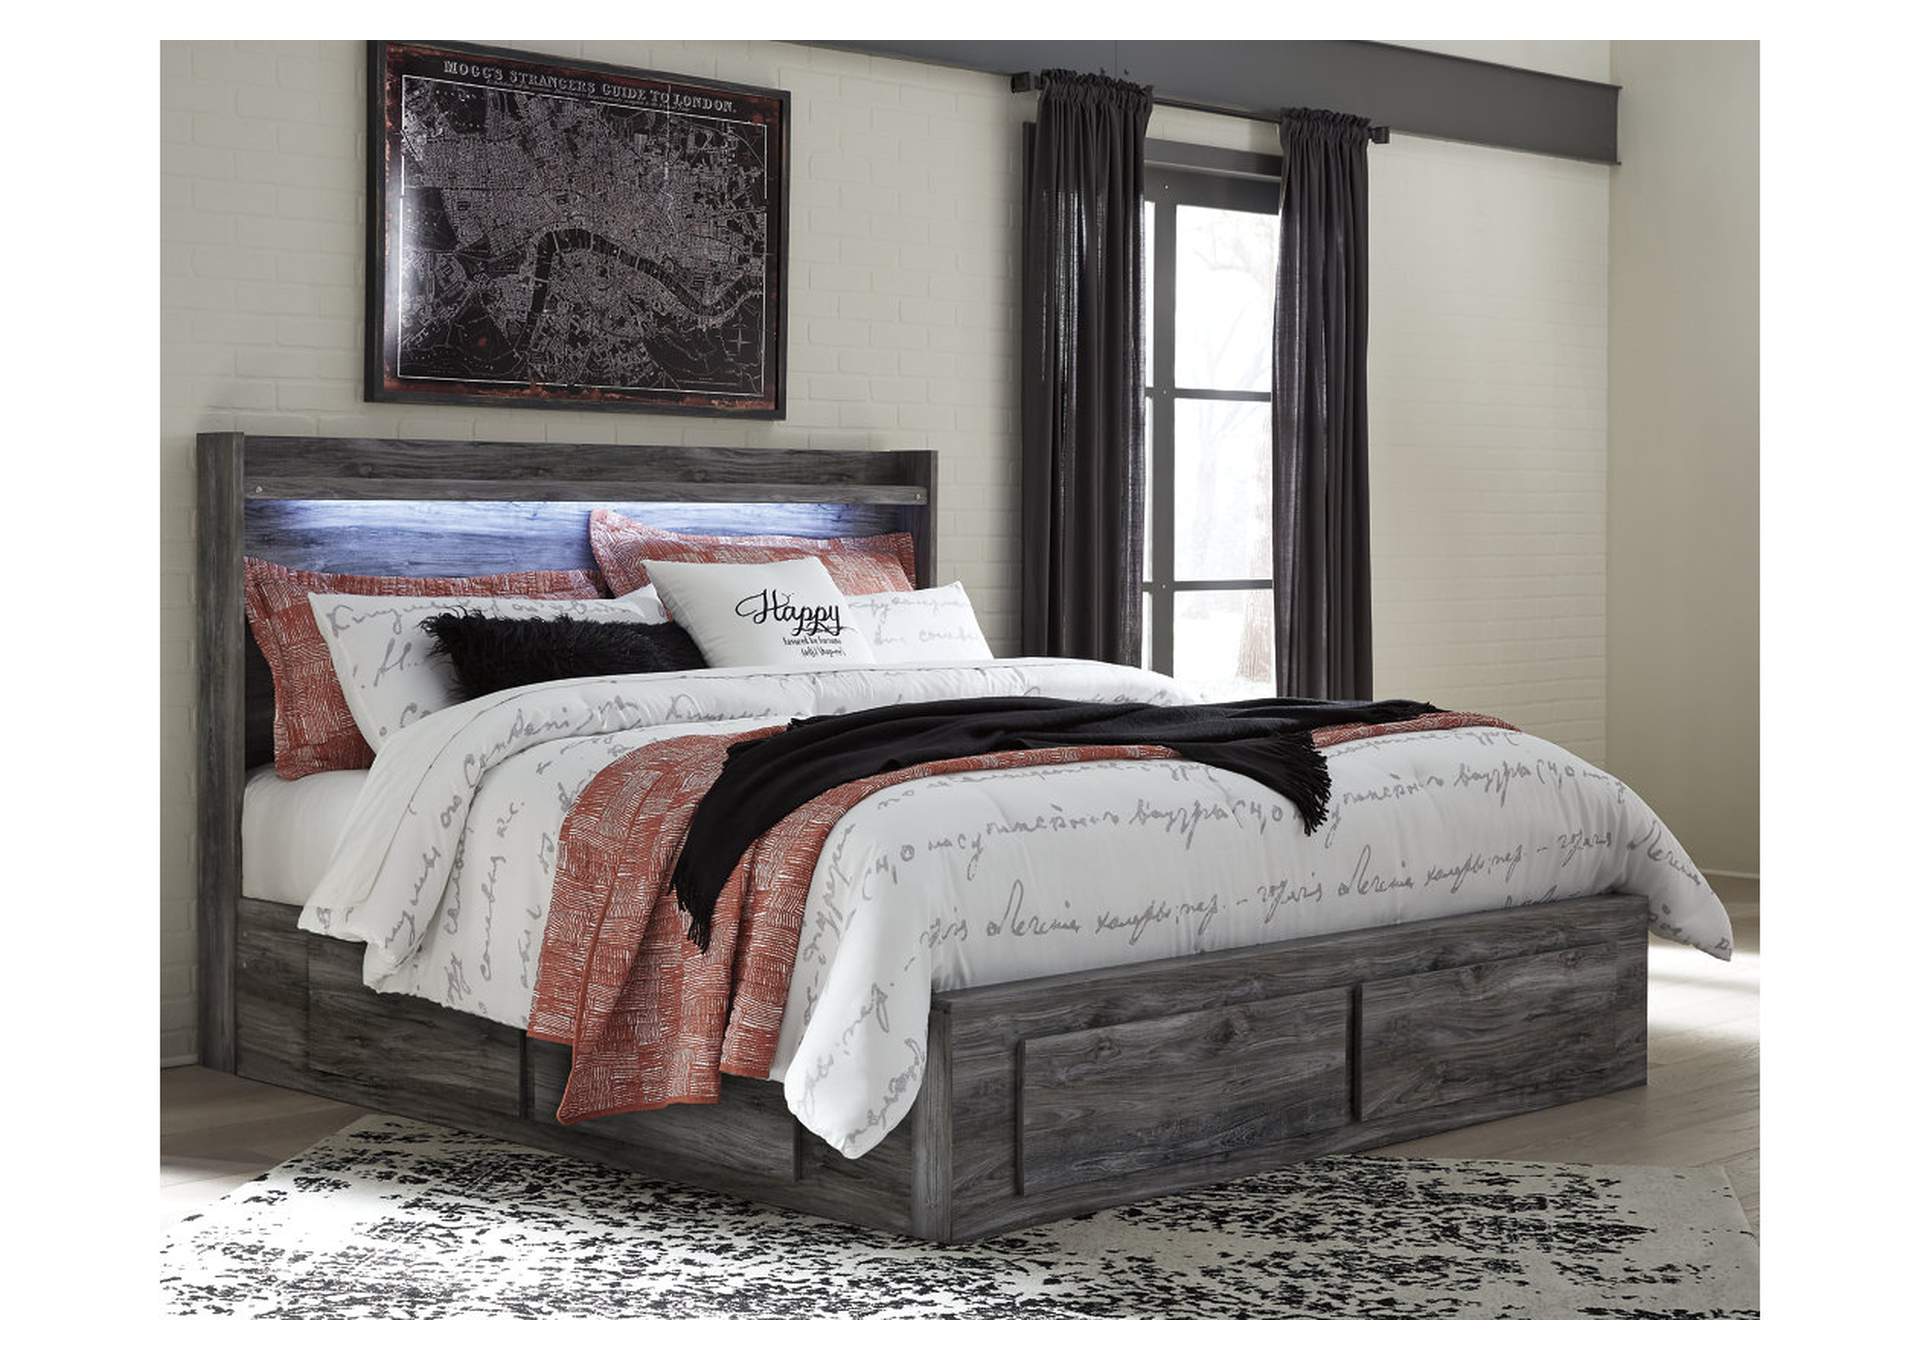 Baystorm King Panel Bed with 6 Storage Drawers,Signature Design By Ashley